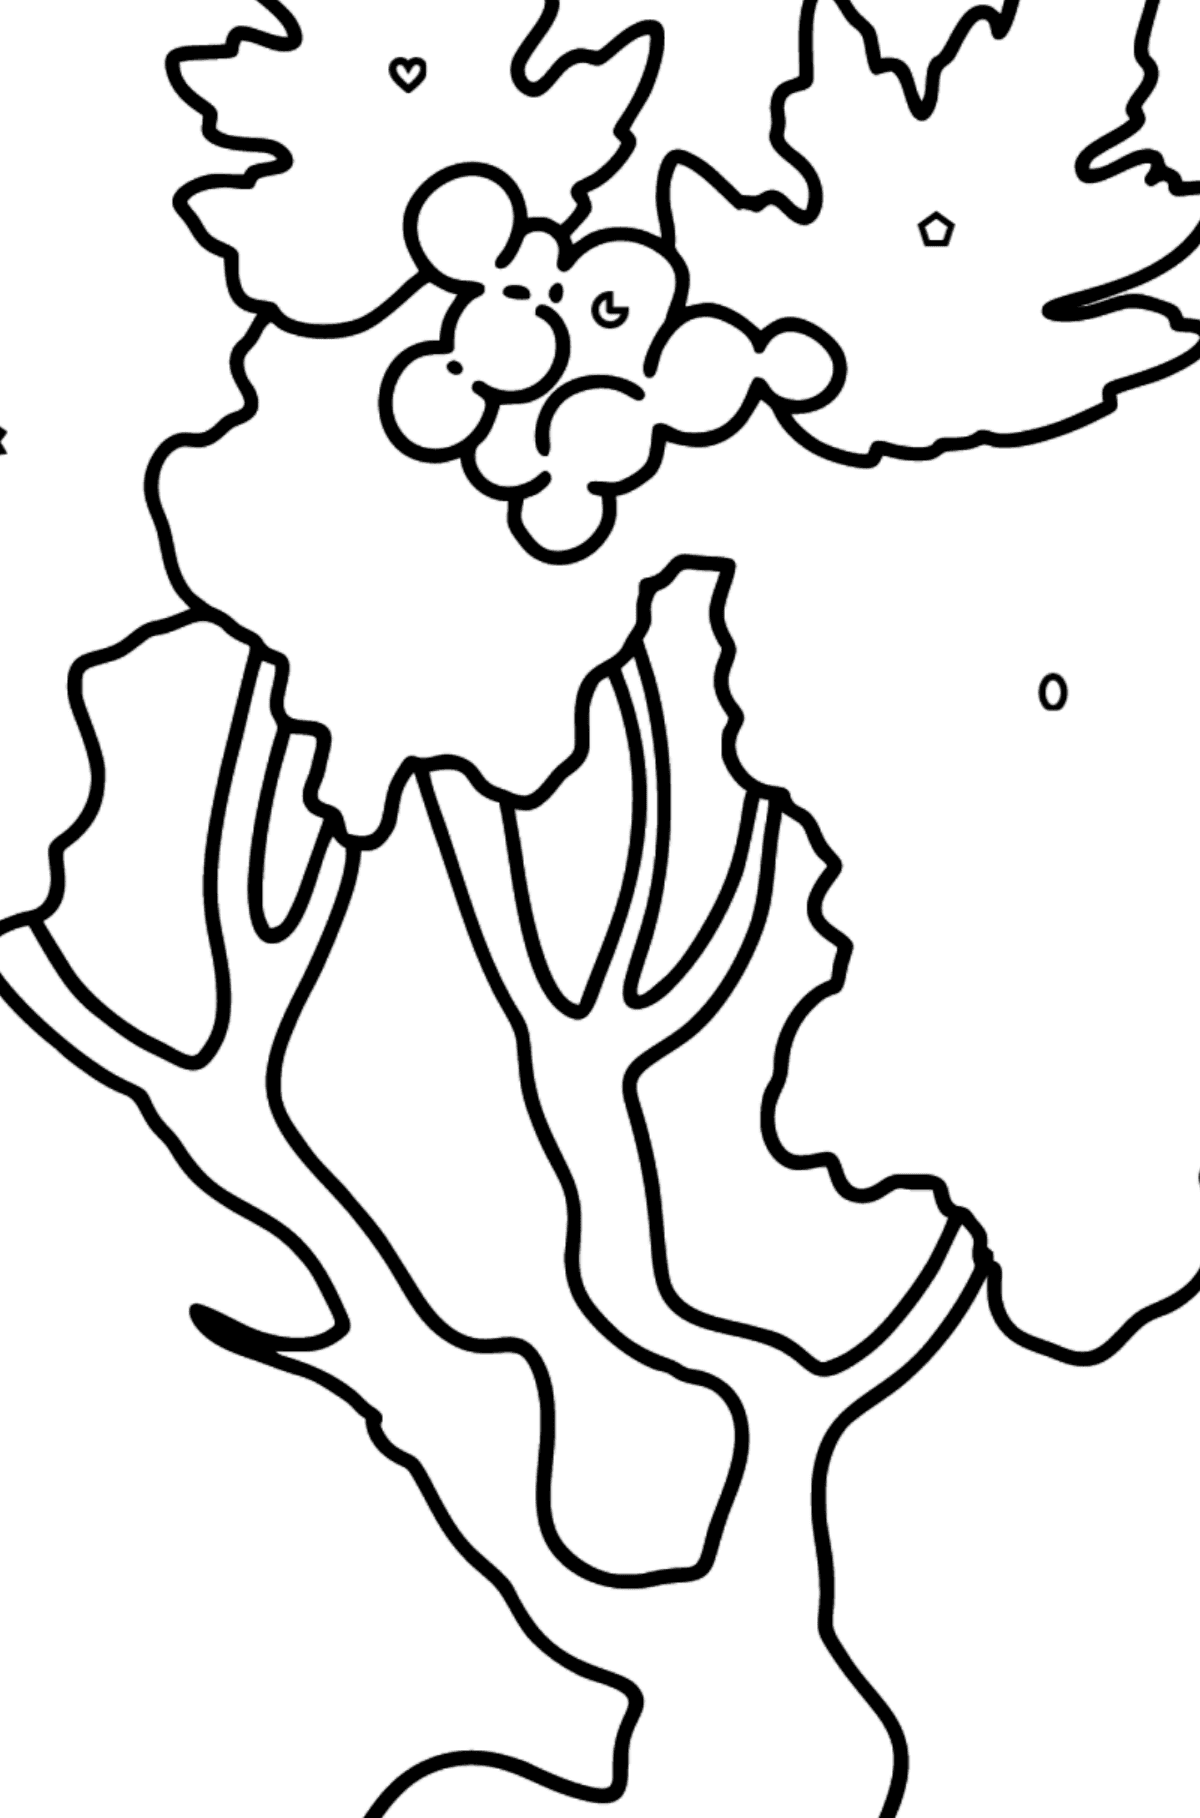 Hawthorn coloring page - Coloring by Geometric Shapes for Kids